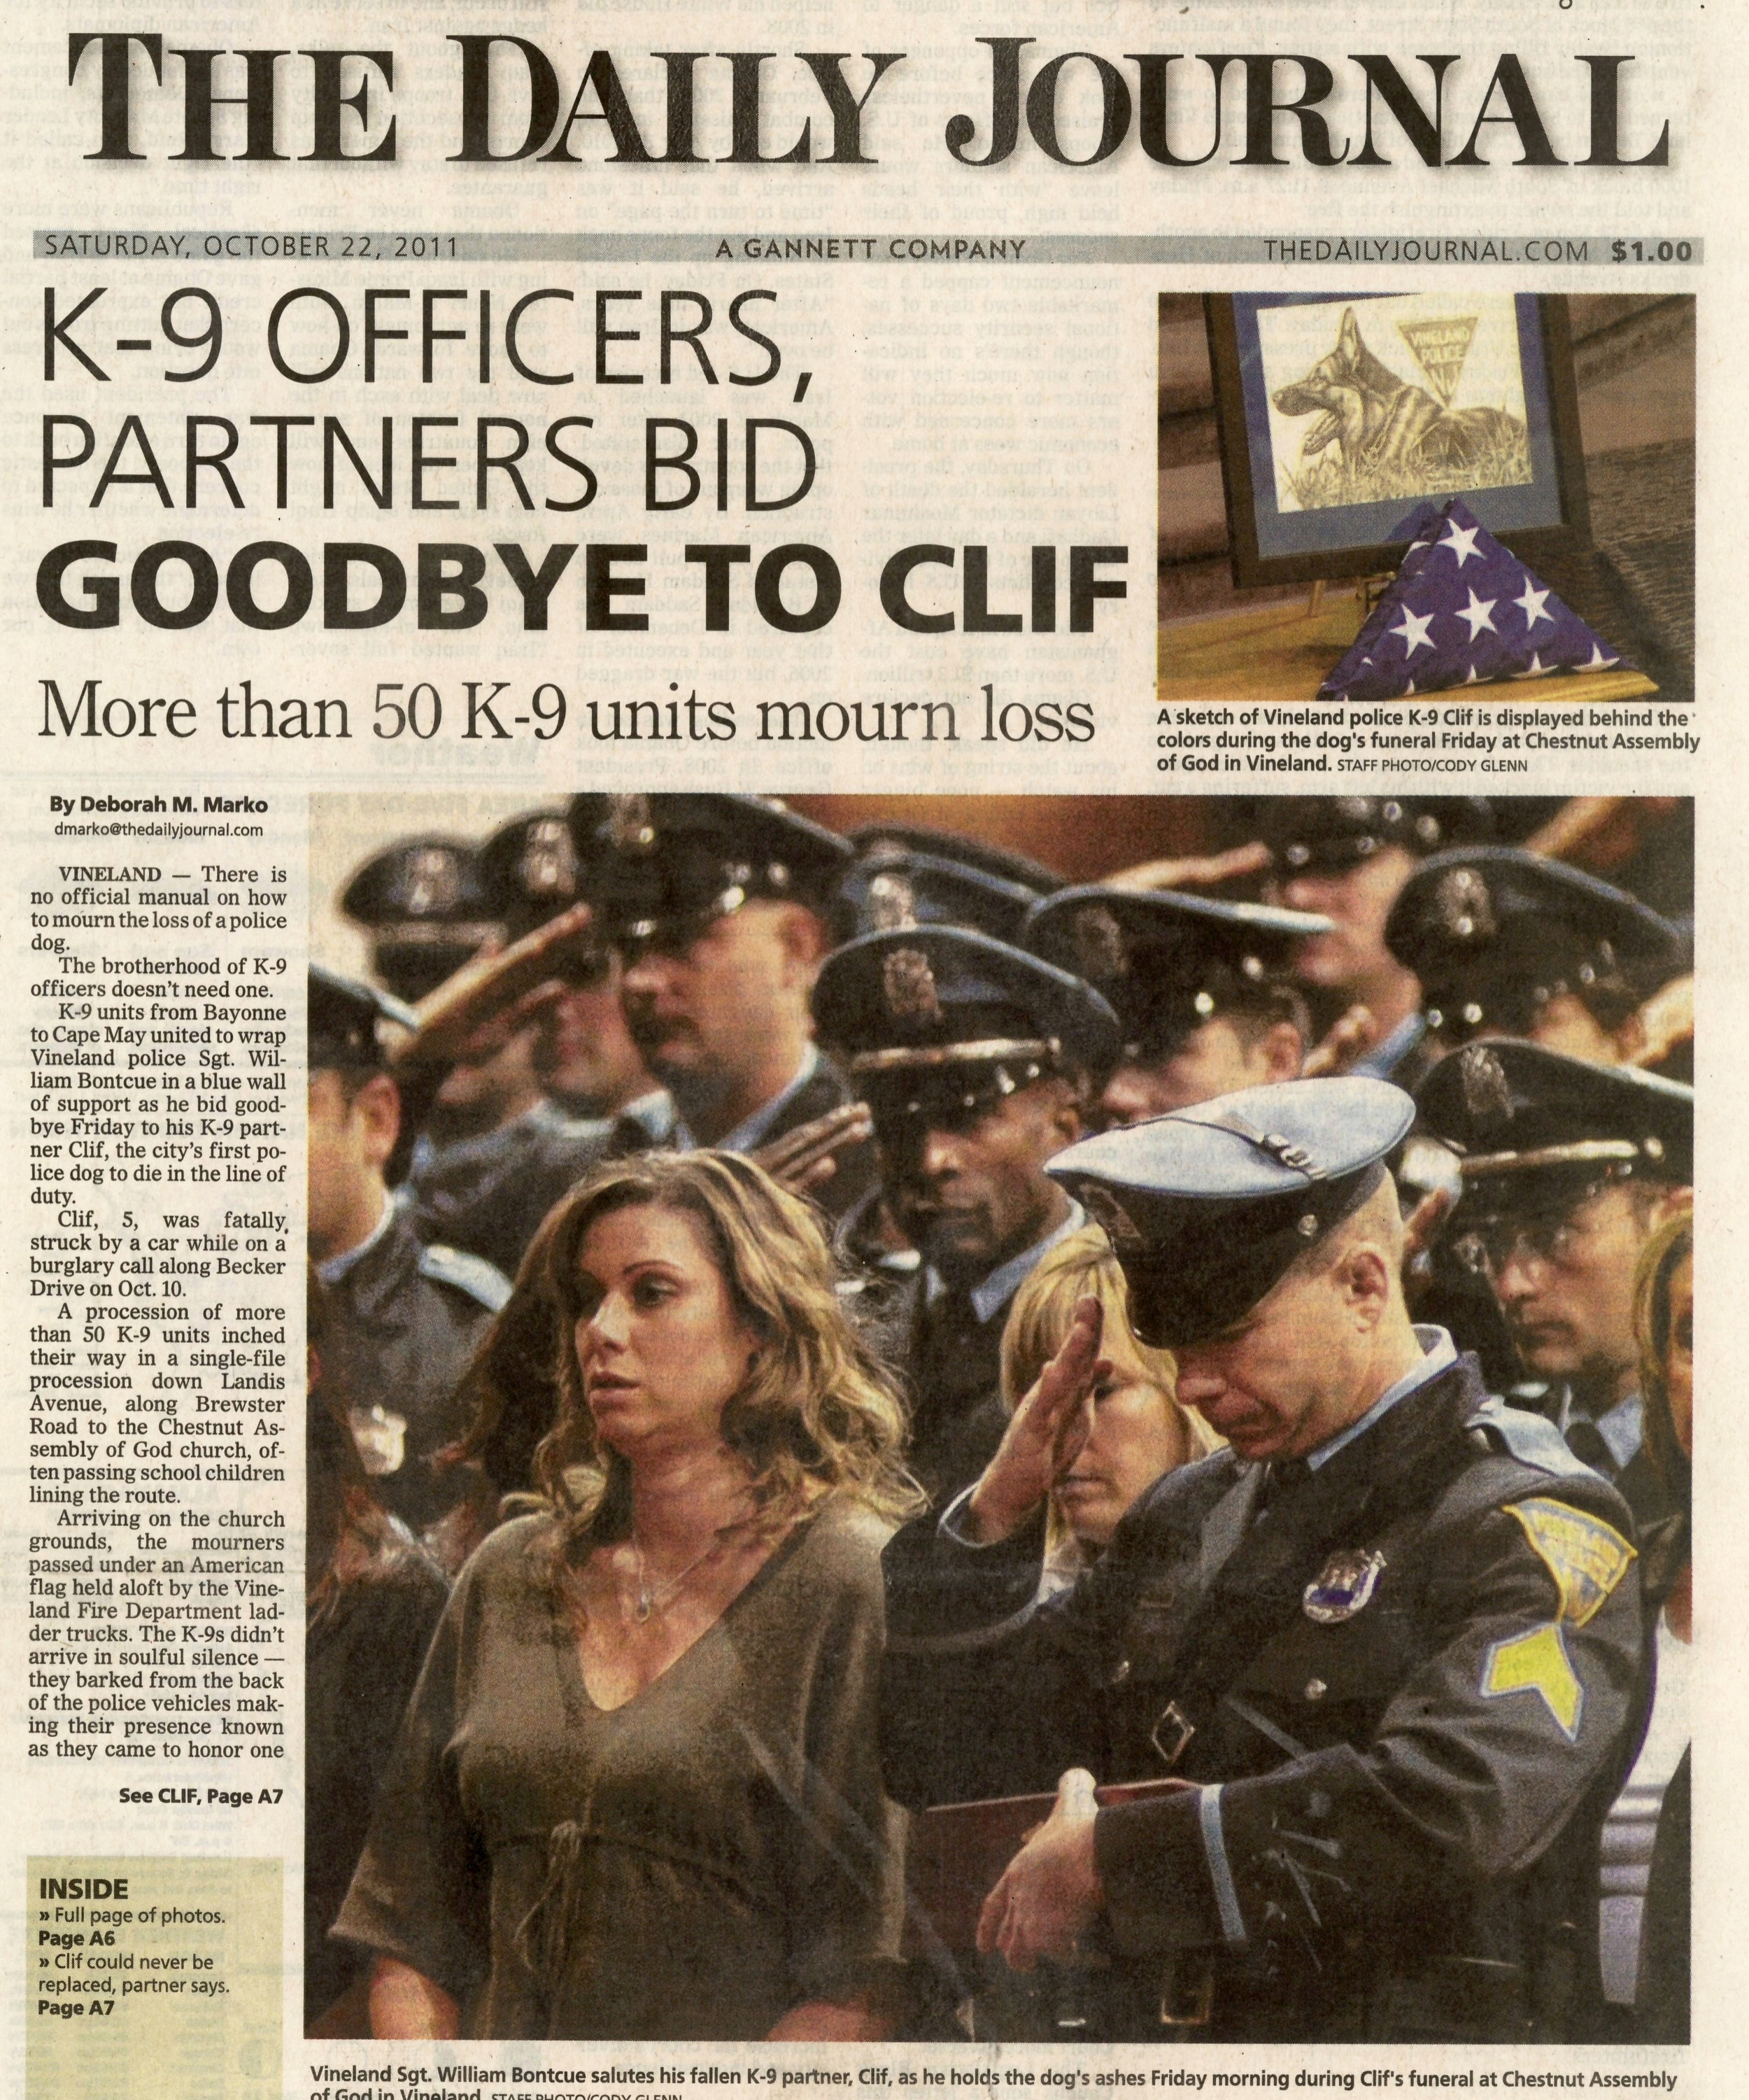  Vineland Police K-9 Officer salutes his late partner Clif during a memorial service October 22 2011 /  The Daily Journal  